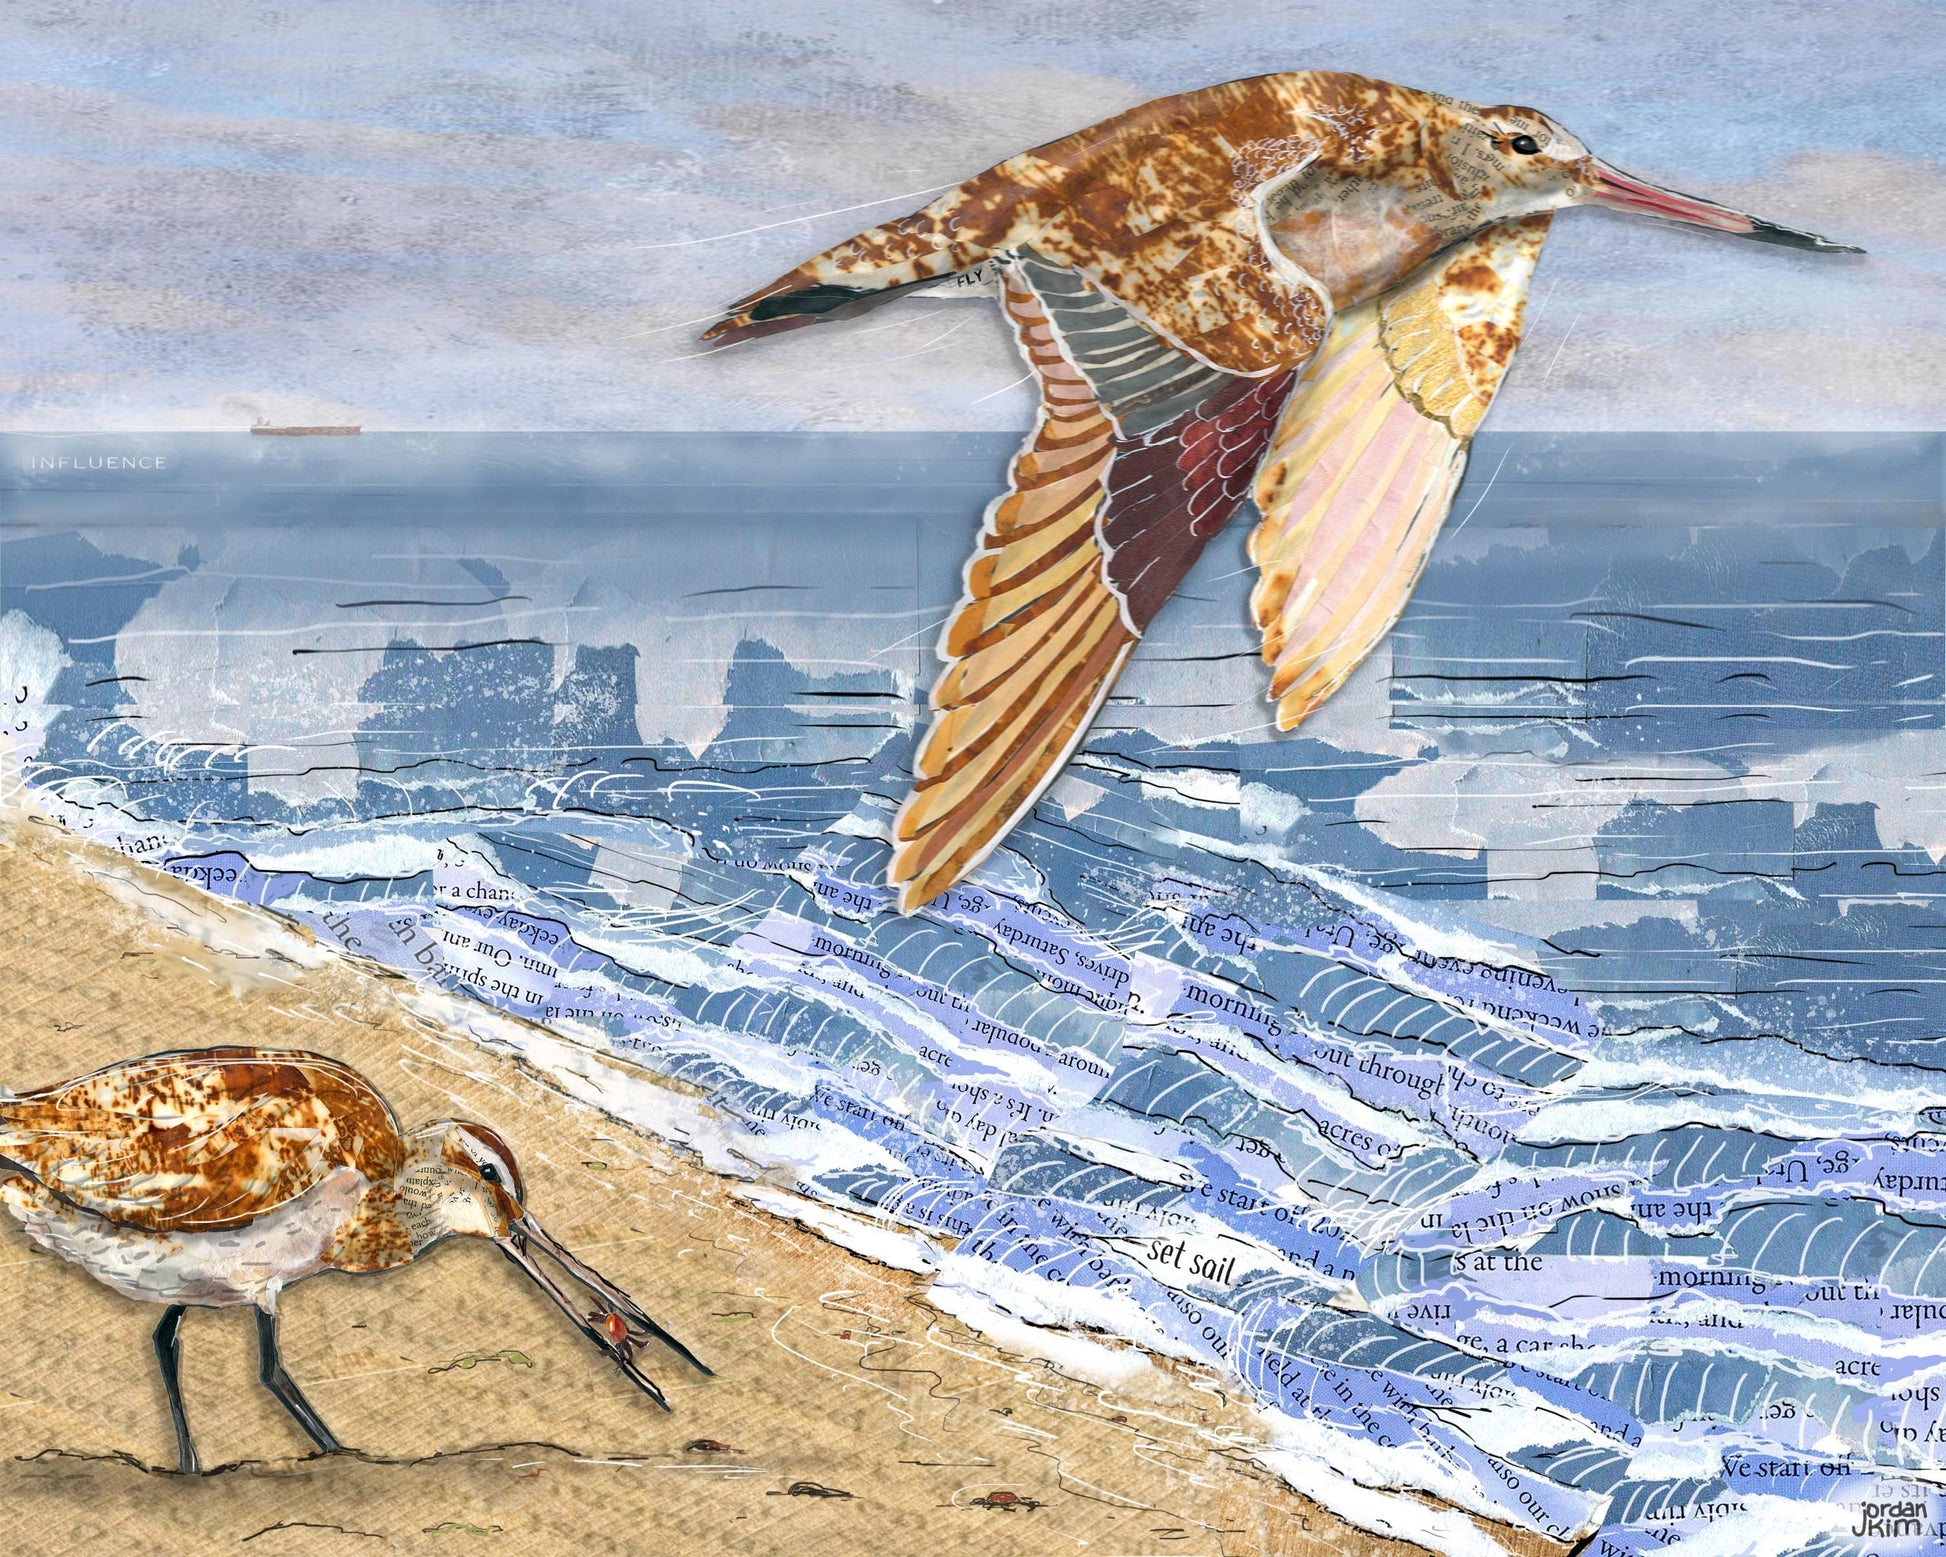 8x10 Art Print of a mixed media collage of two Bar-Tailed Godwits at the ocean shore, beach, shorebirds, migration